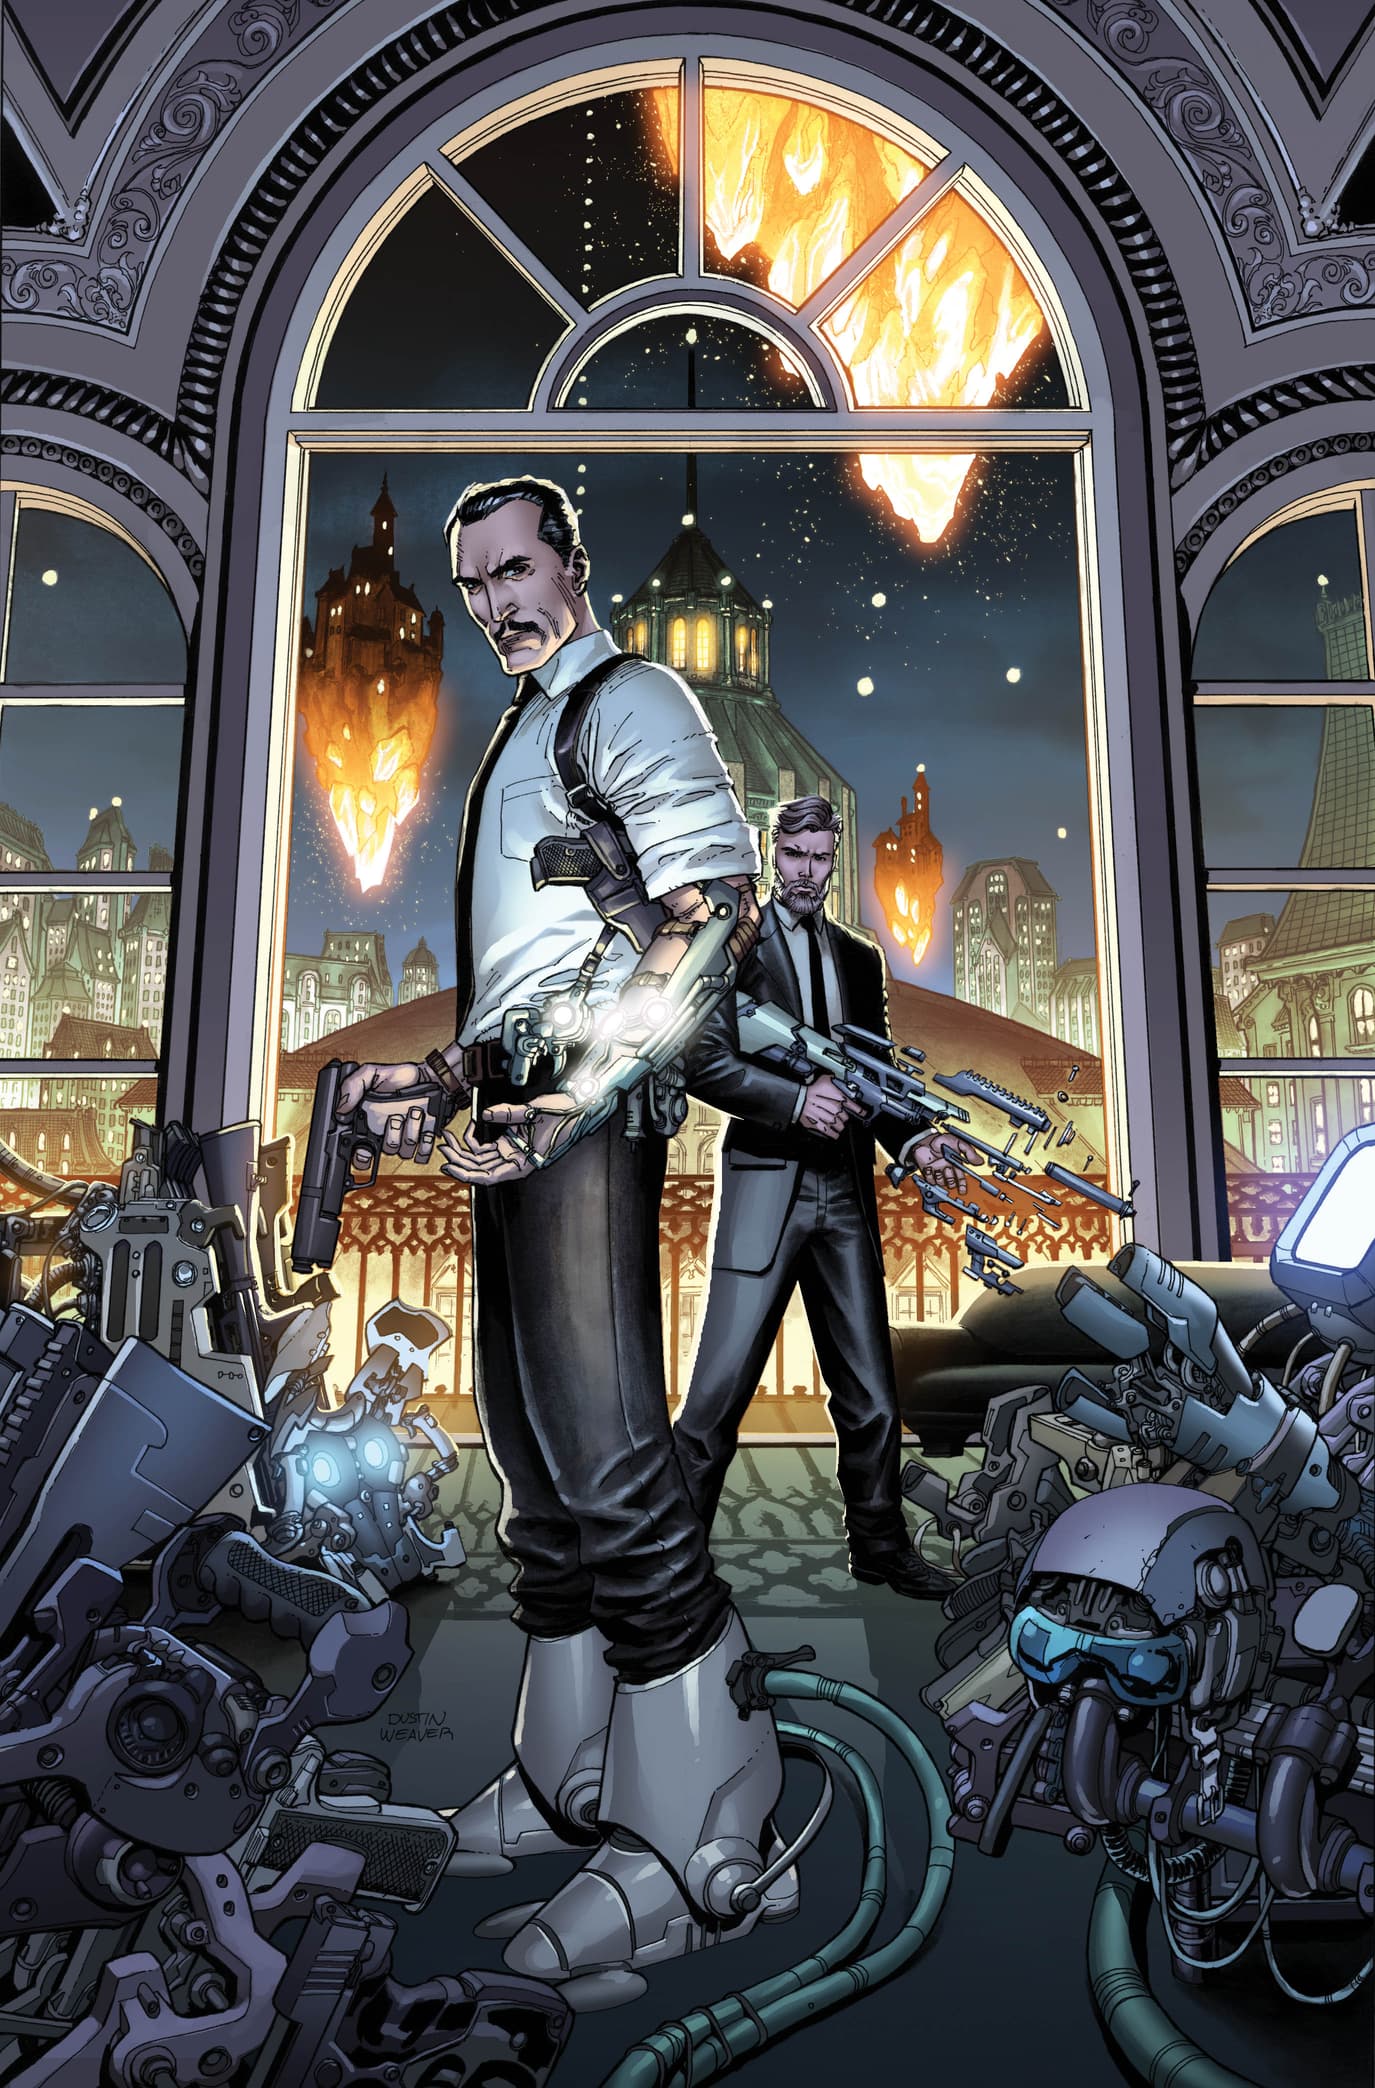 Variant cover to S.H.I.E.L.D. (2010) #5 by Dustin Weaver.